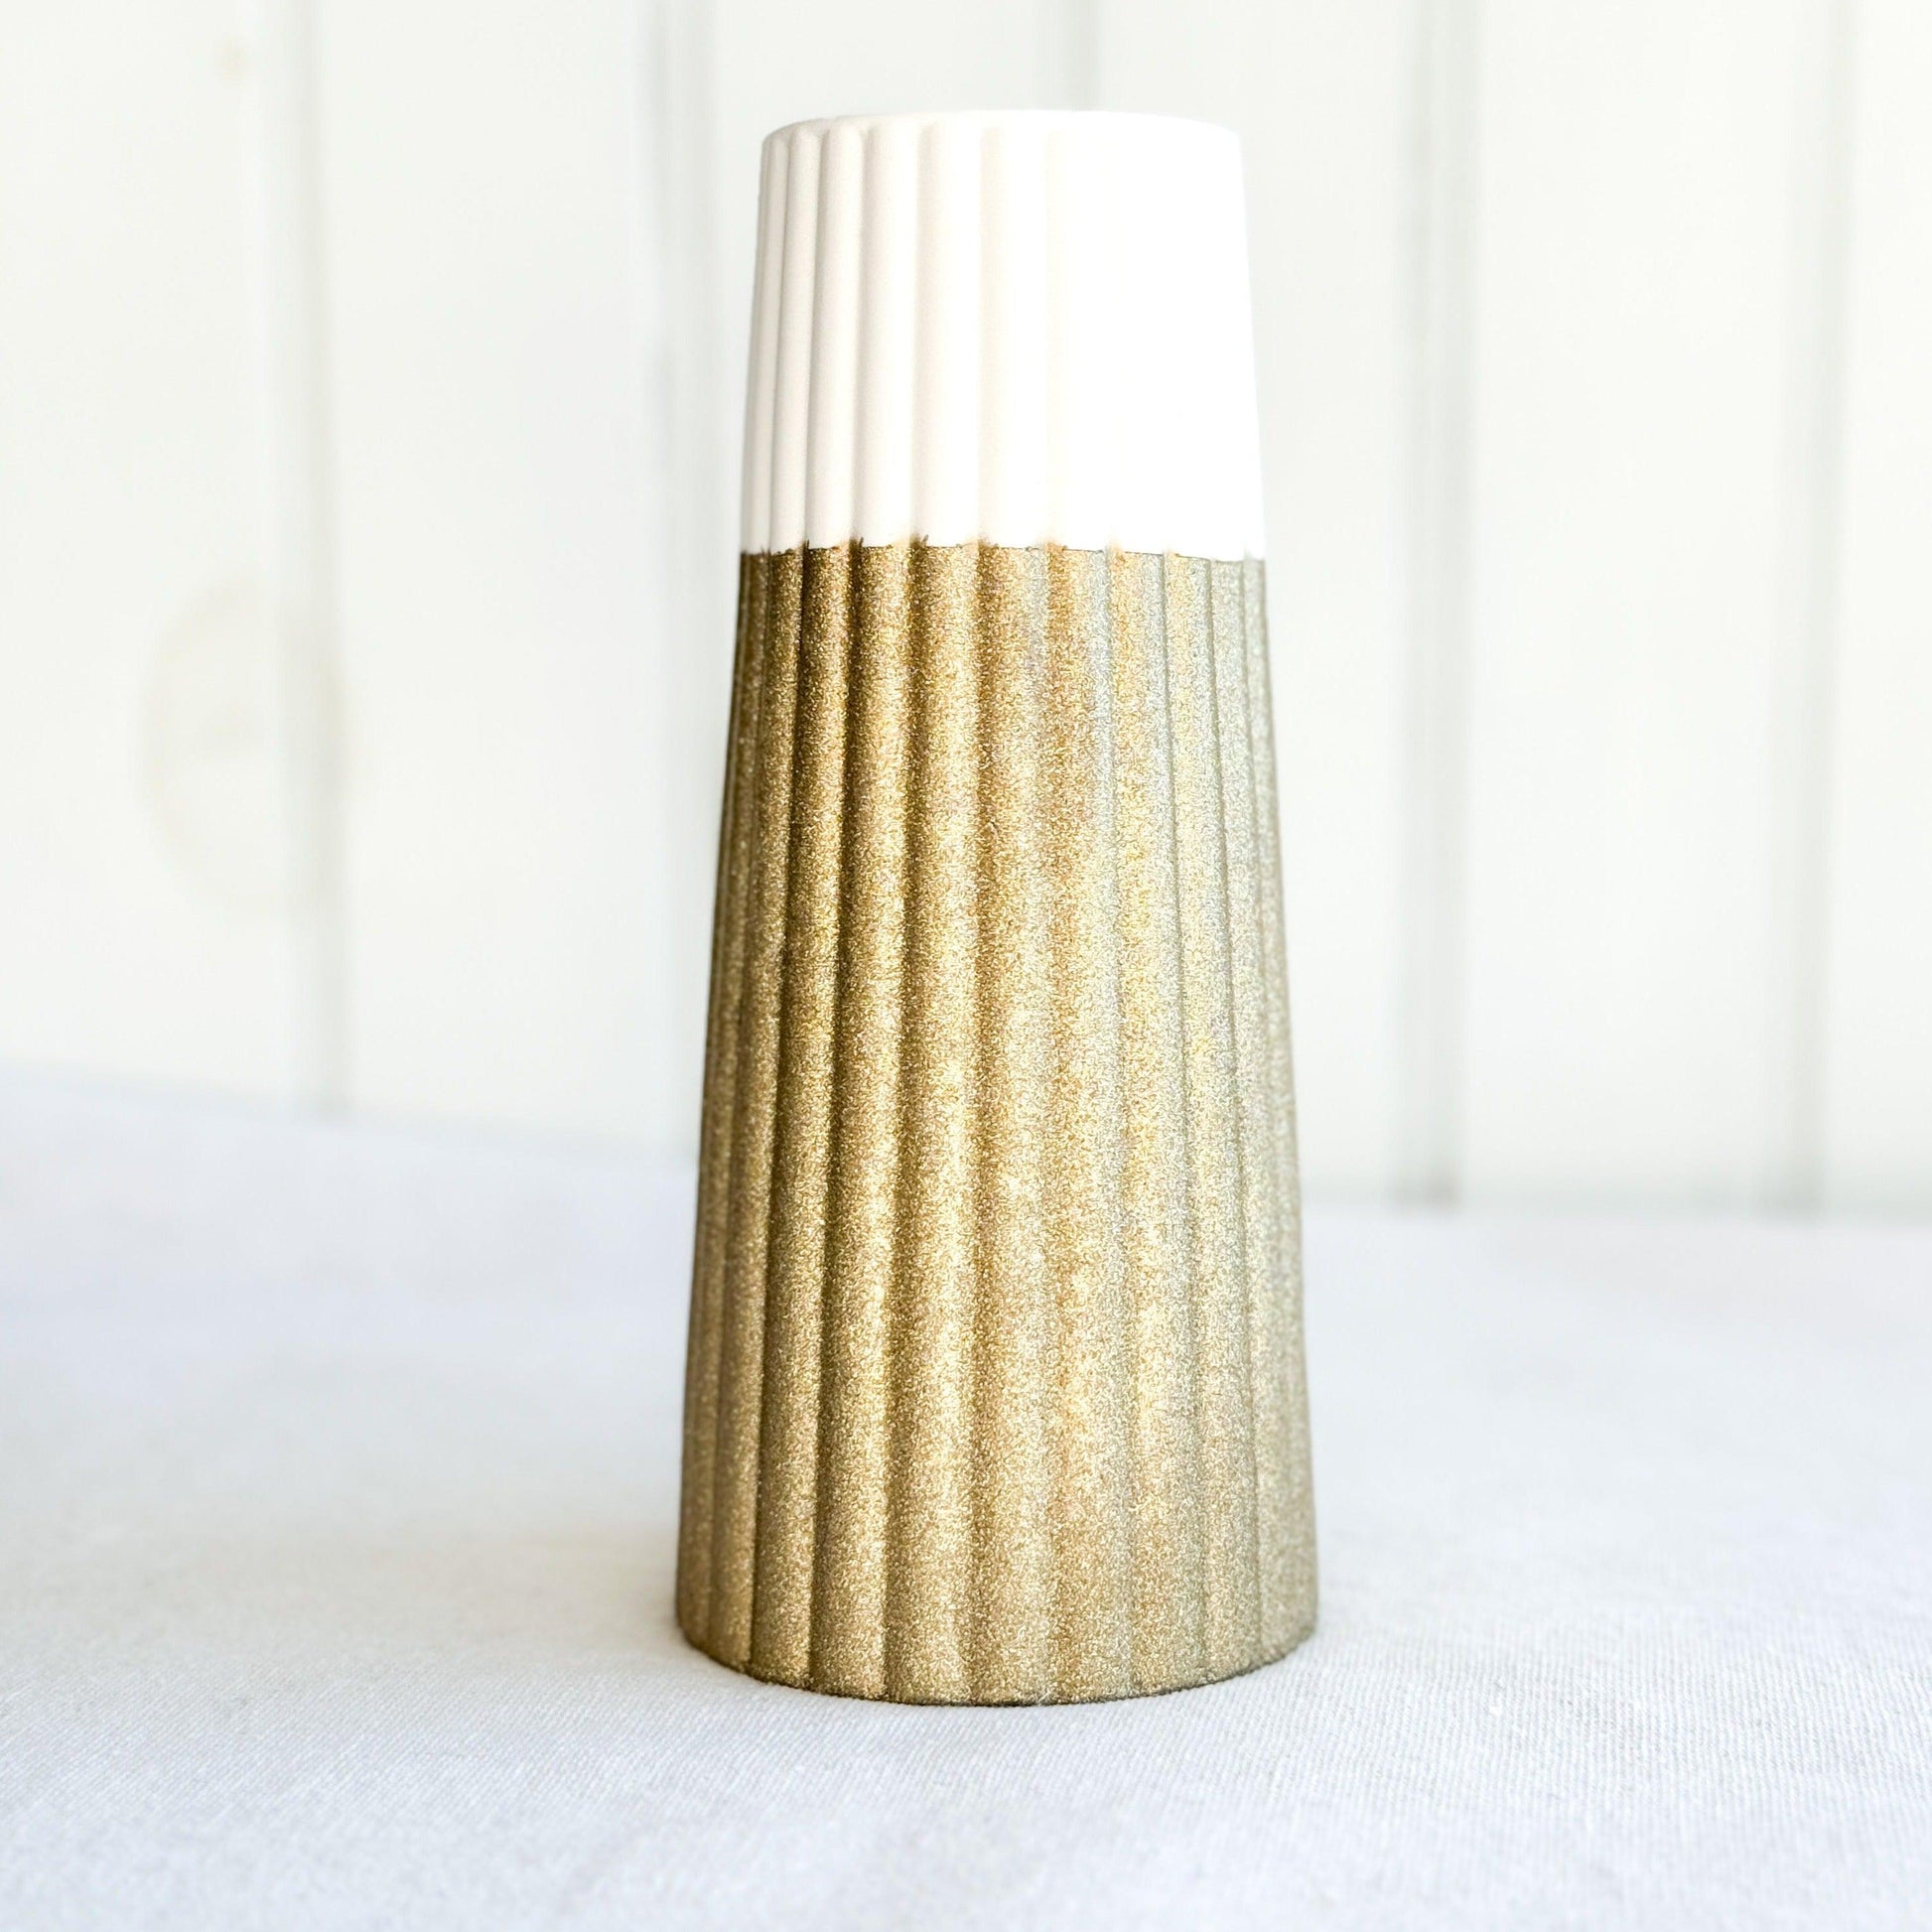 Gold Sparkle Vase - Harbor to Gulf Co.